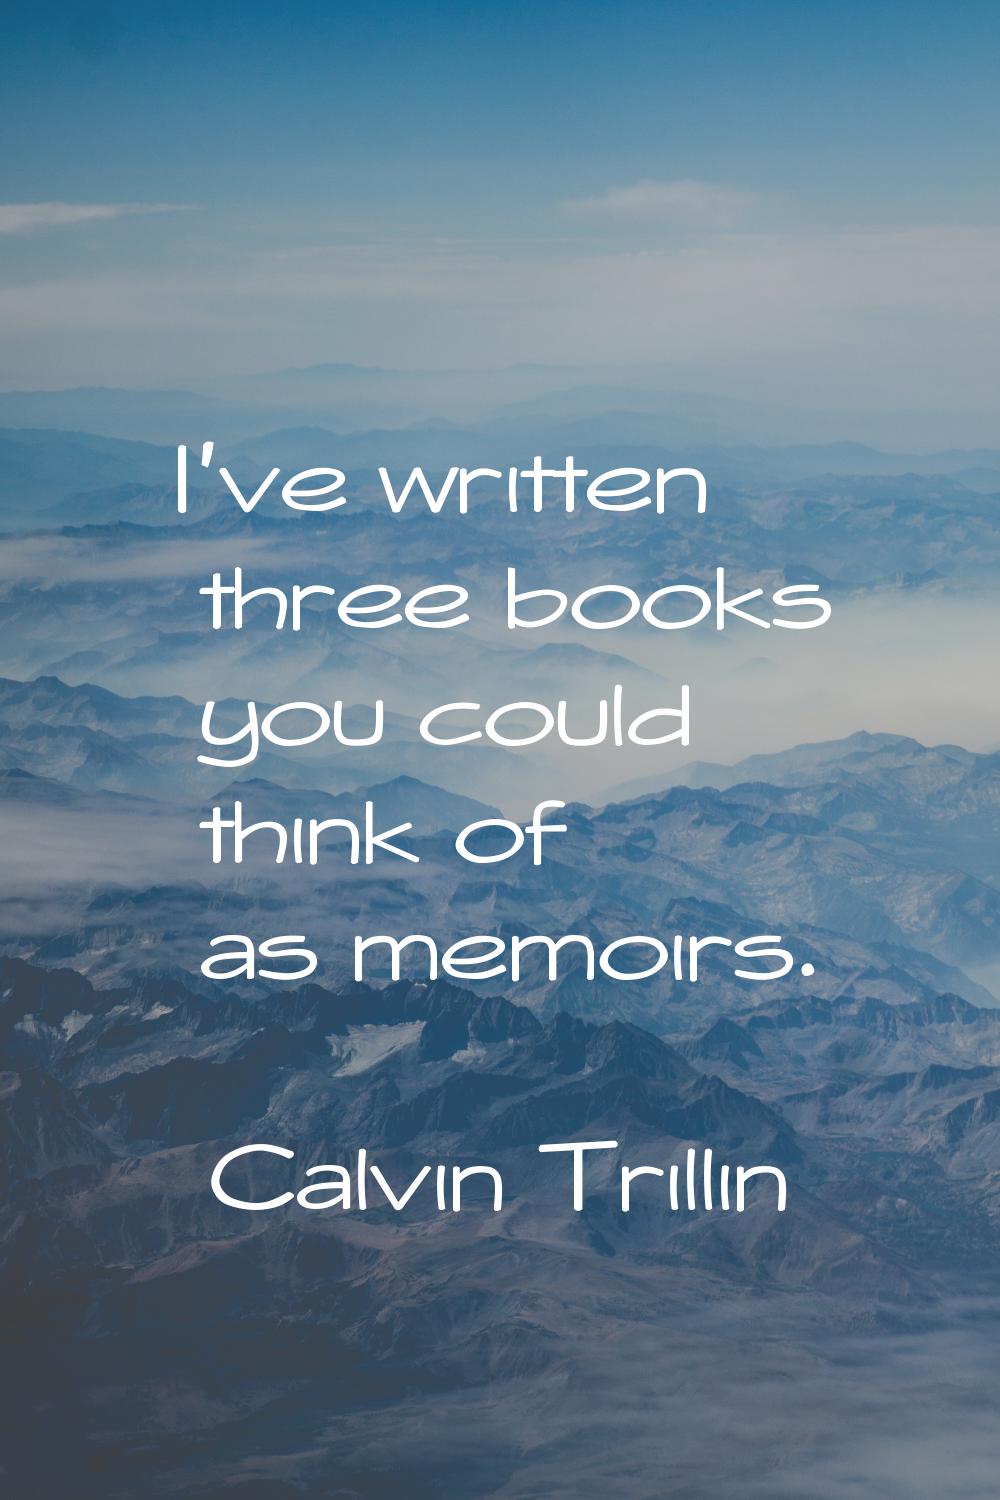 I've written three books you could think of as memoirs.